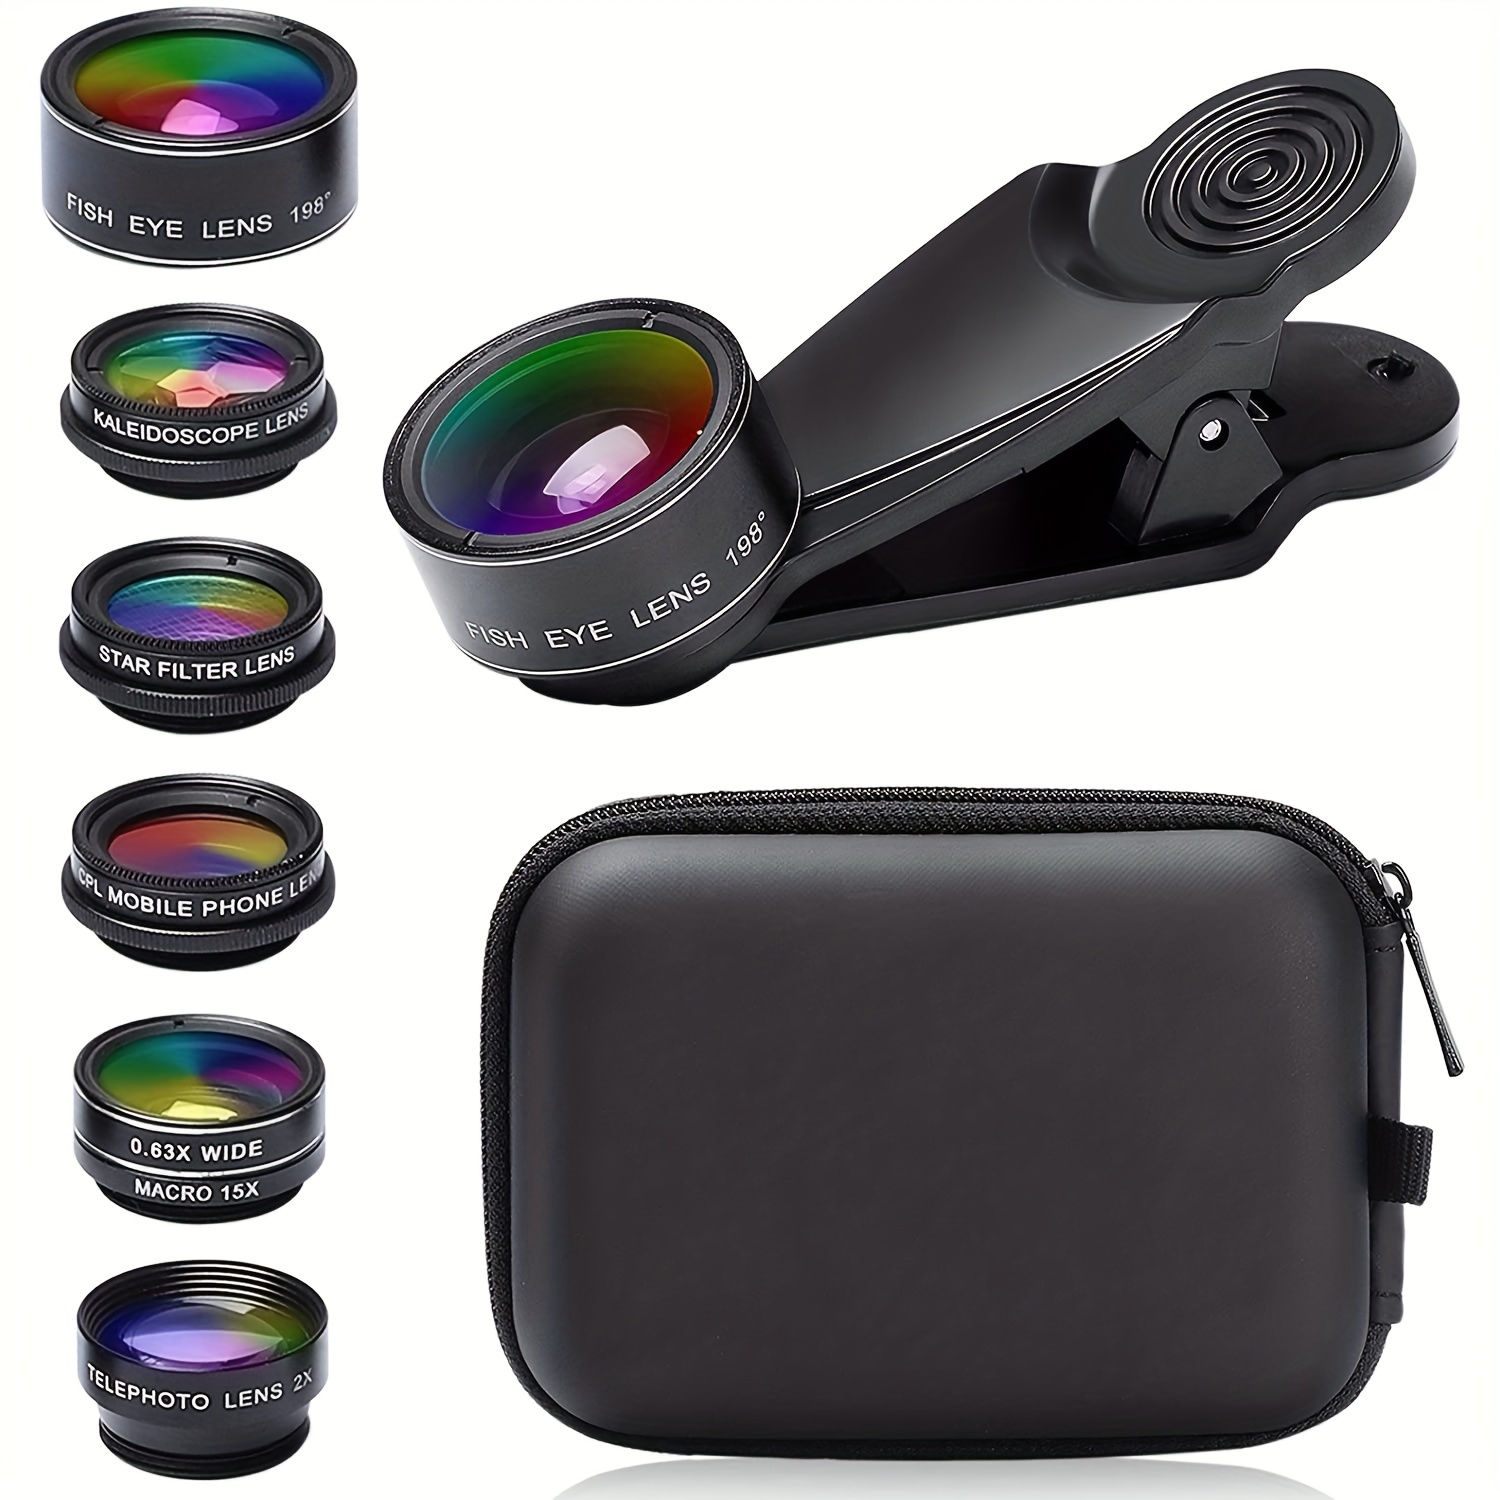 

7 In 1 Phone Camera Lens Kit-198° Fisheye Lens+ 15x Macro Lens+ 0.63x Wide Angle Lens+ Long Focal Lens 2x+ Cpl+ Kaleidoscope+starburst+, Clip-on Camera Lens For Iphone 11/12/13, For Samsung/android